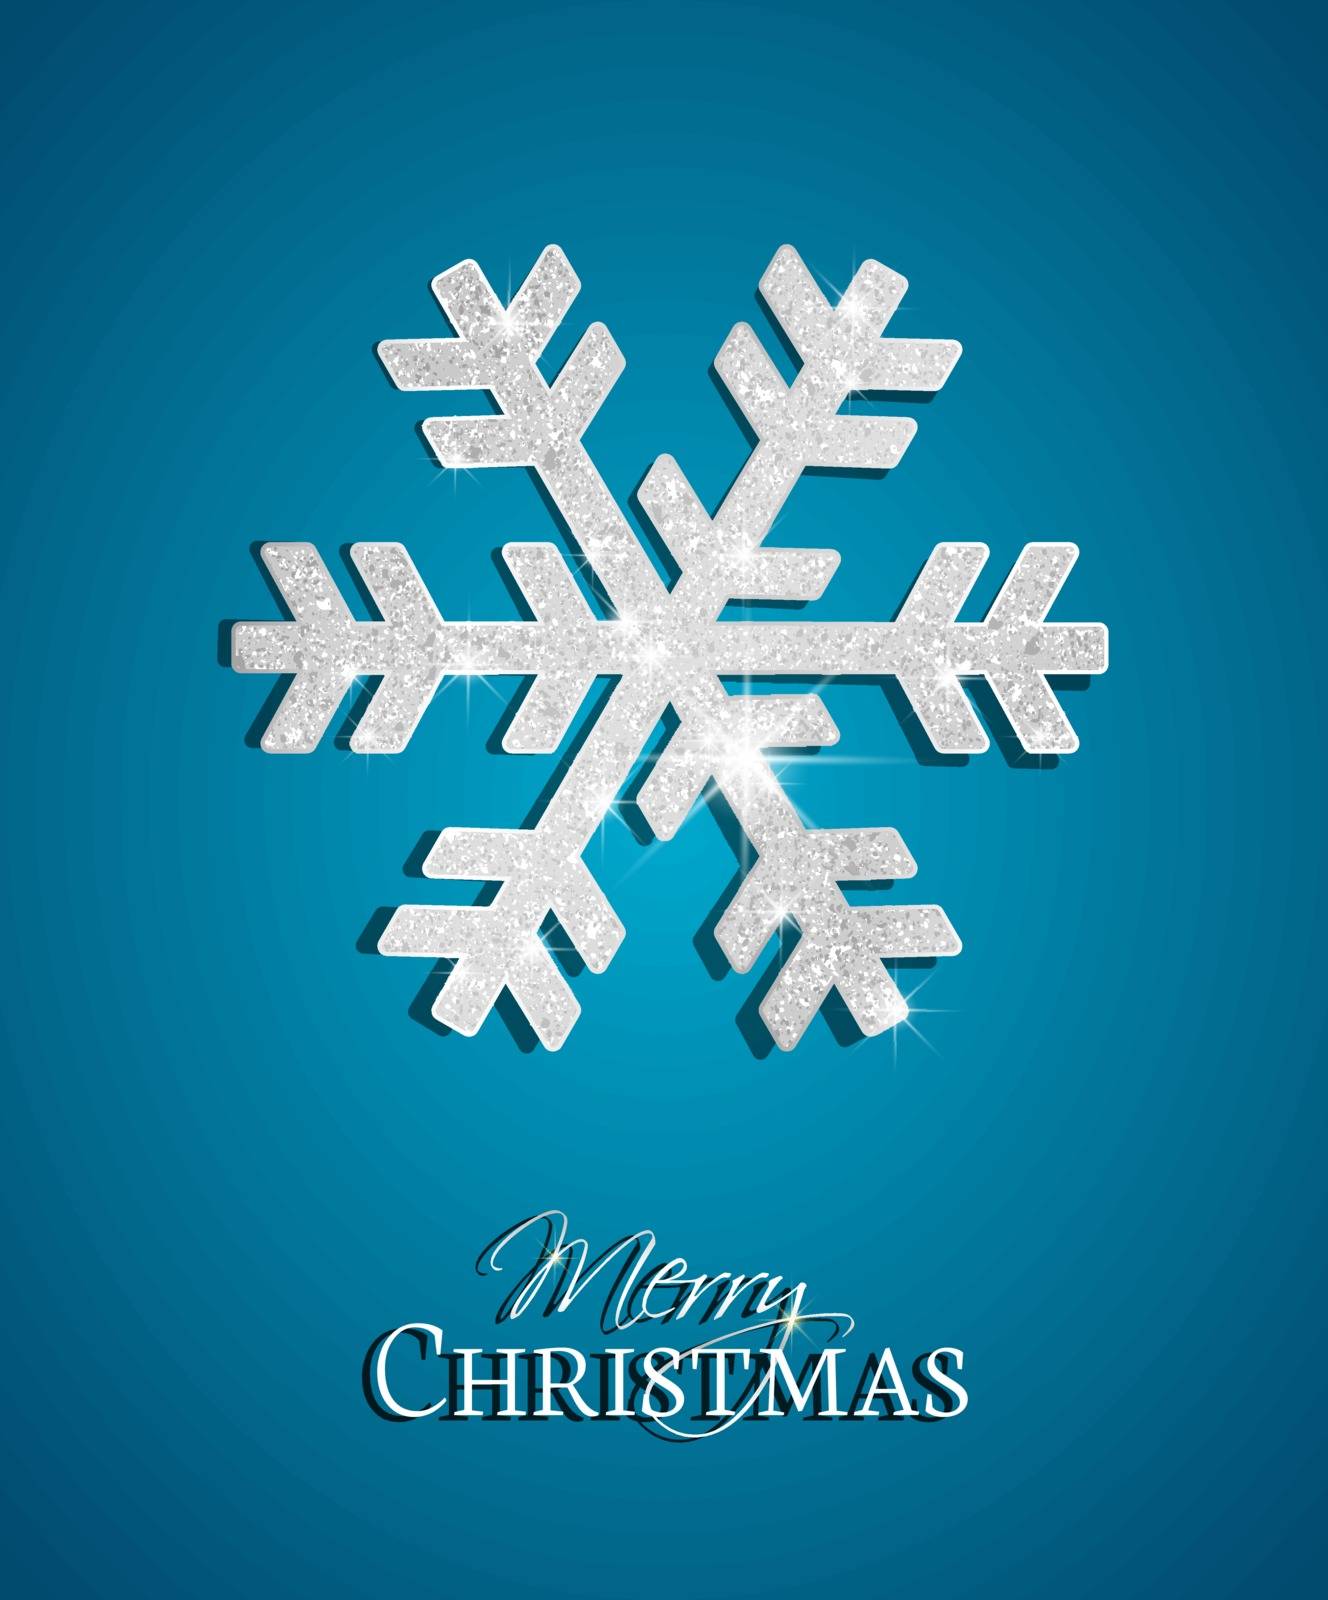 Silver Christmas Snowflake on a blue background